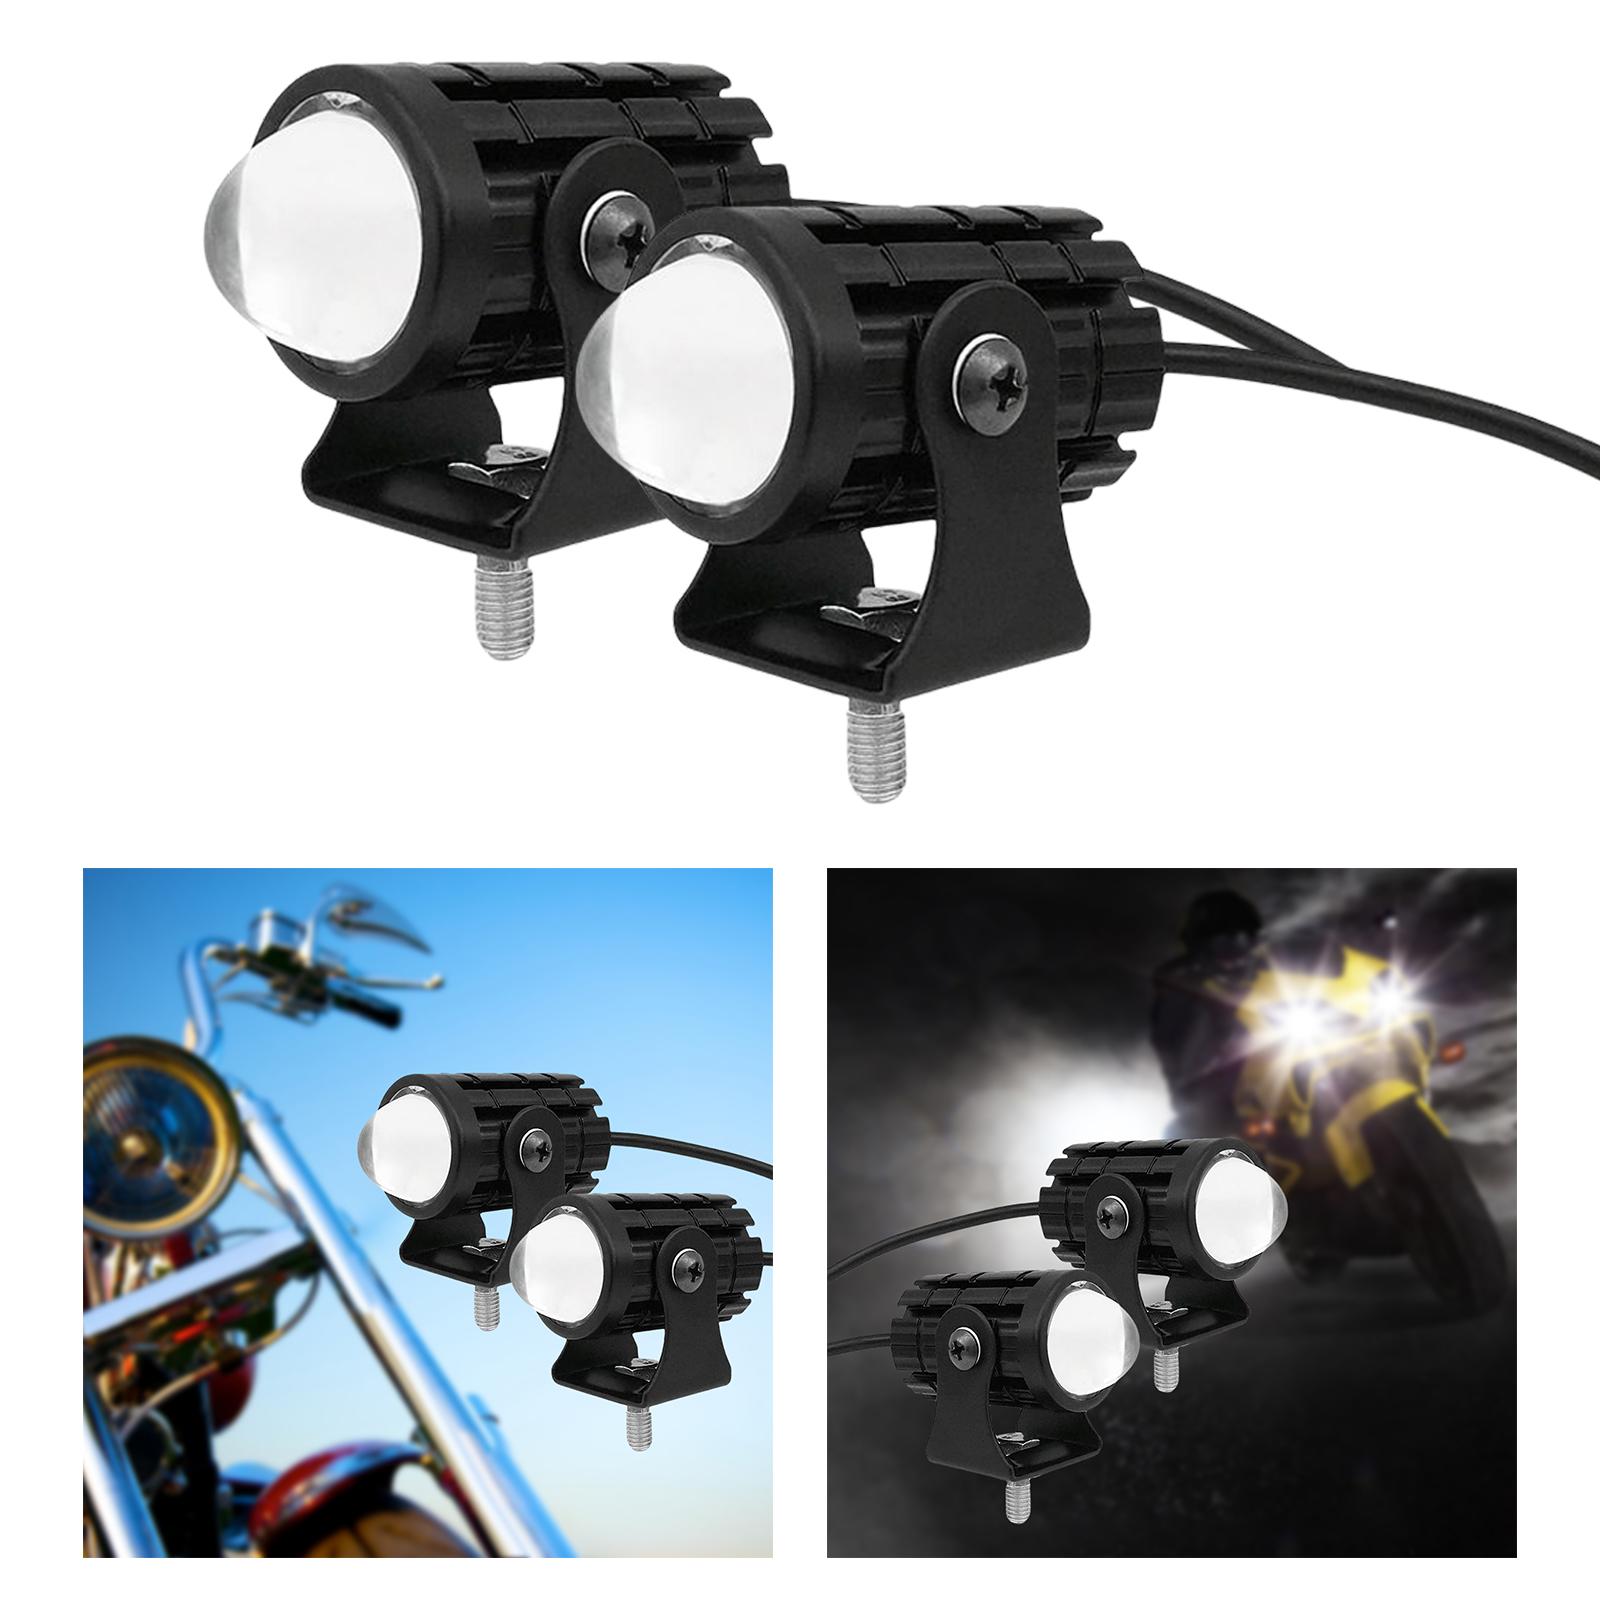 1 Pair Dual-Color Motorcycle LED Spotlights Super Bright for Cars ATV Trucks